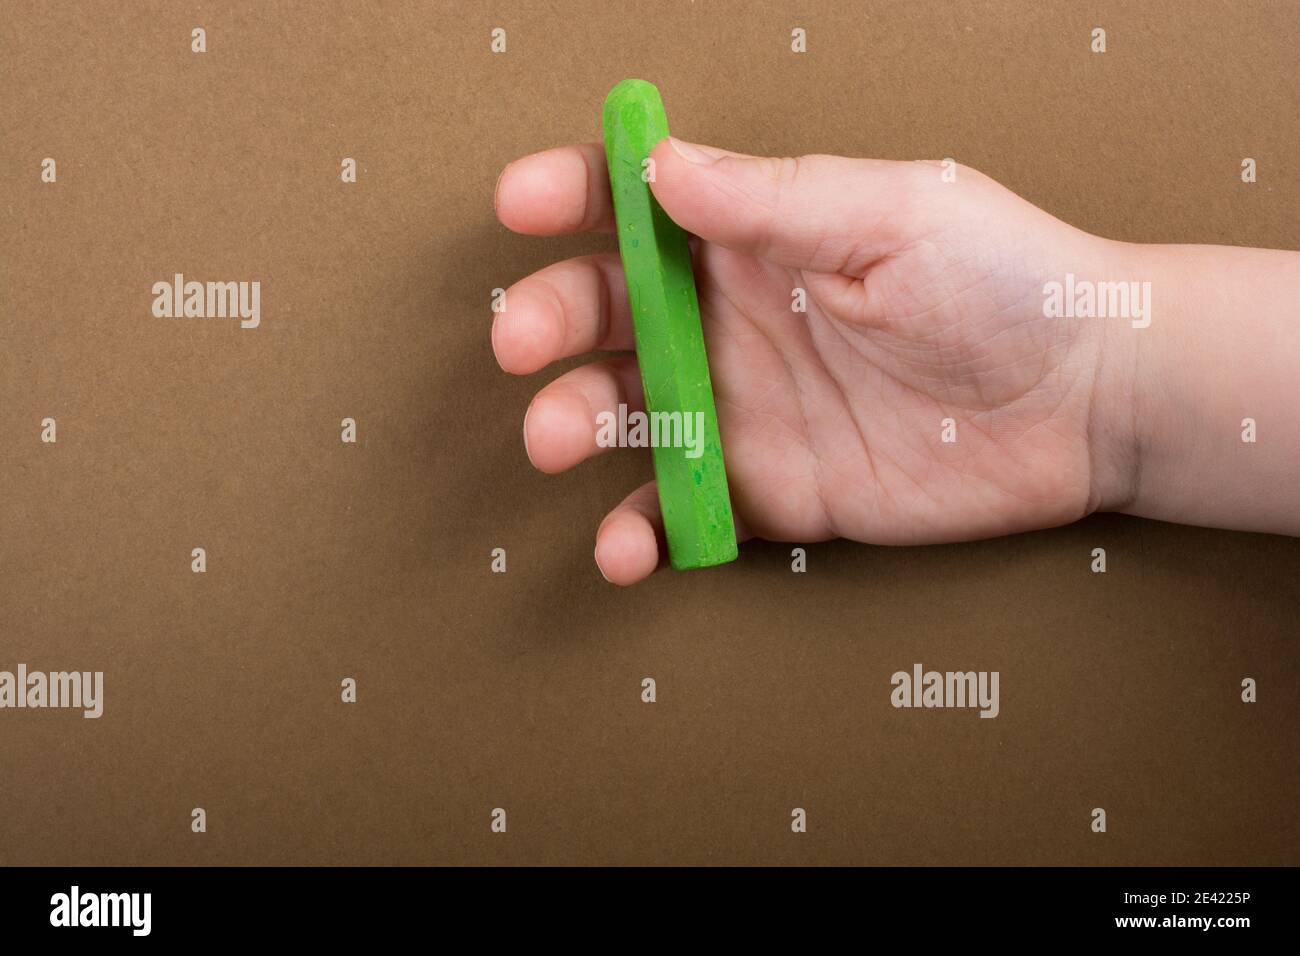 Closeup shot of a child holding a green crayon by a brown background Stock Photo